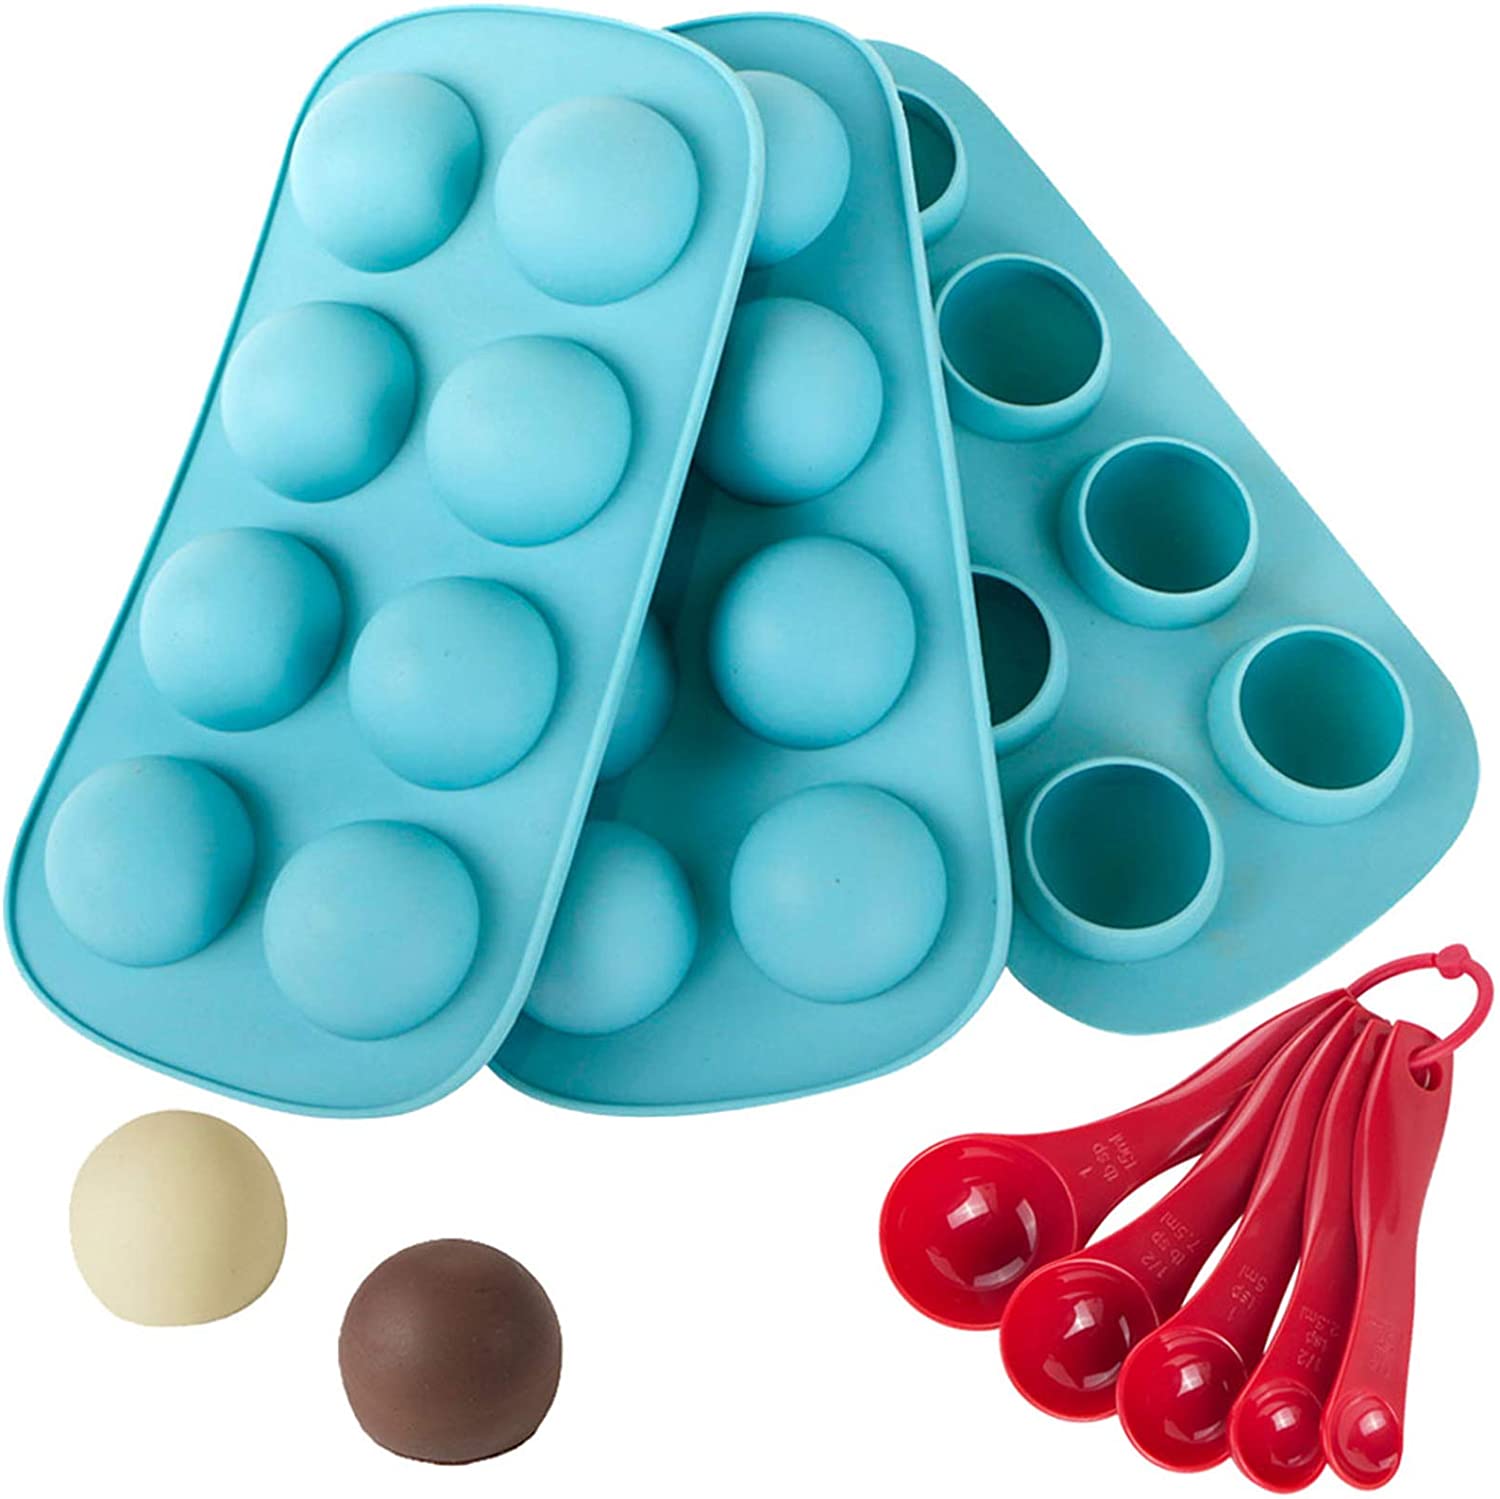 Webake silicone shere chocolate bomb molds for cordial truffle pudding